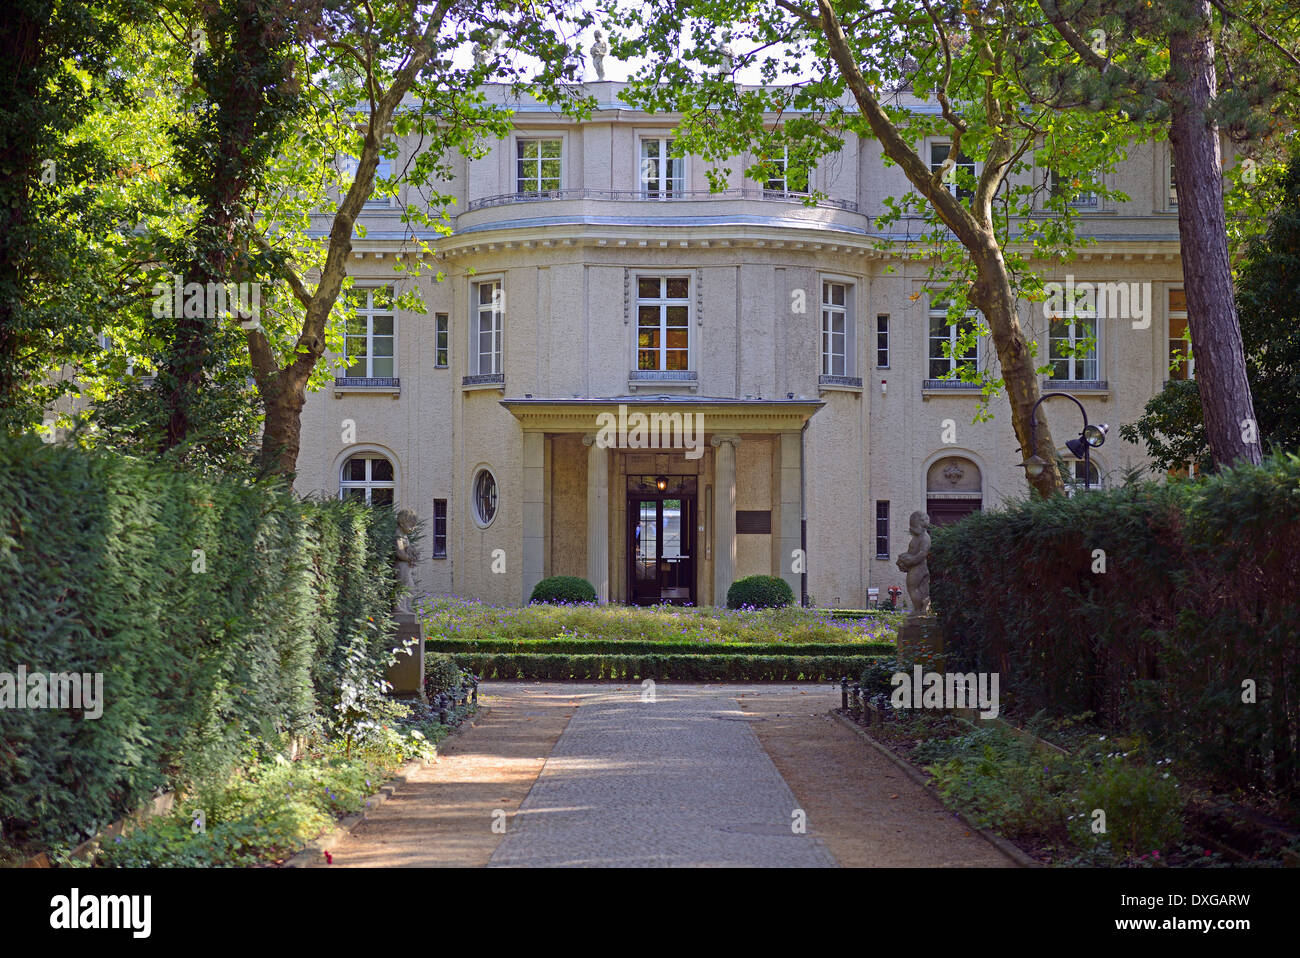 Villa of the Wannsee Conferencem Am grossen Wannsee, Zehlendorf district, Berlin, Germany Stock Photo